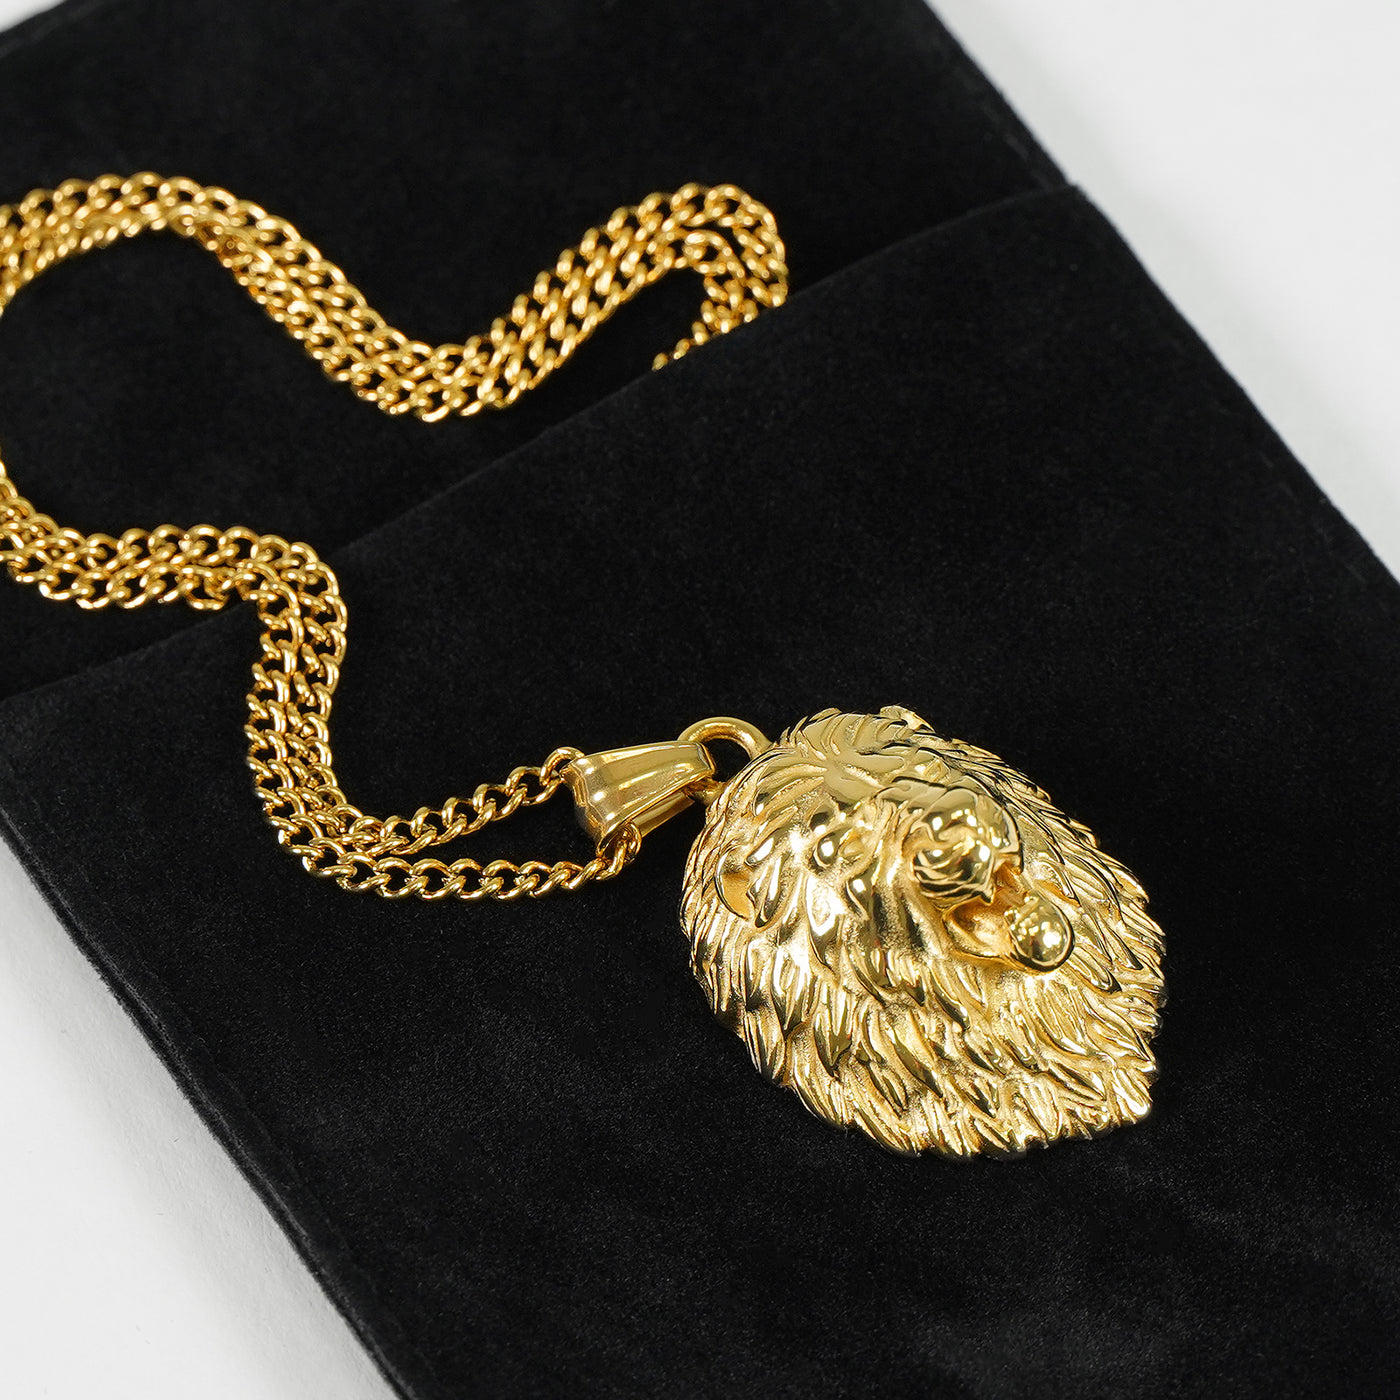 Lion Pendant with Chain Necklace - Gold Plated Stainless Steel